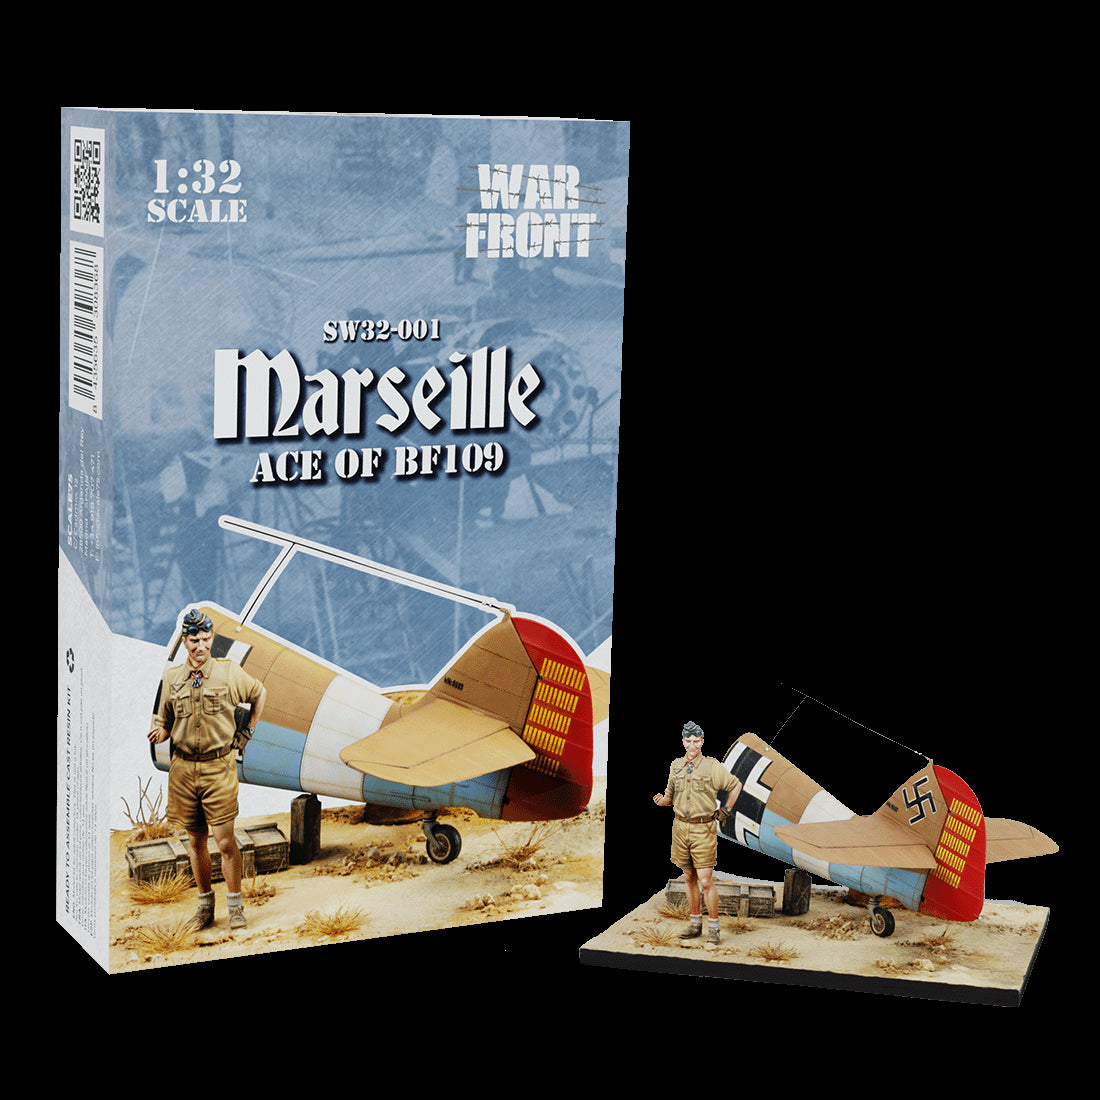 MARSEILLE, ACE OF BF109